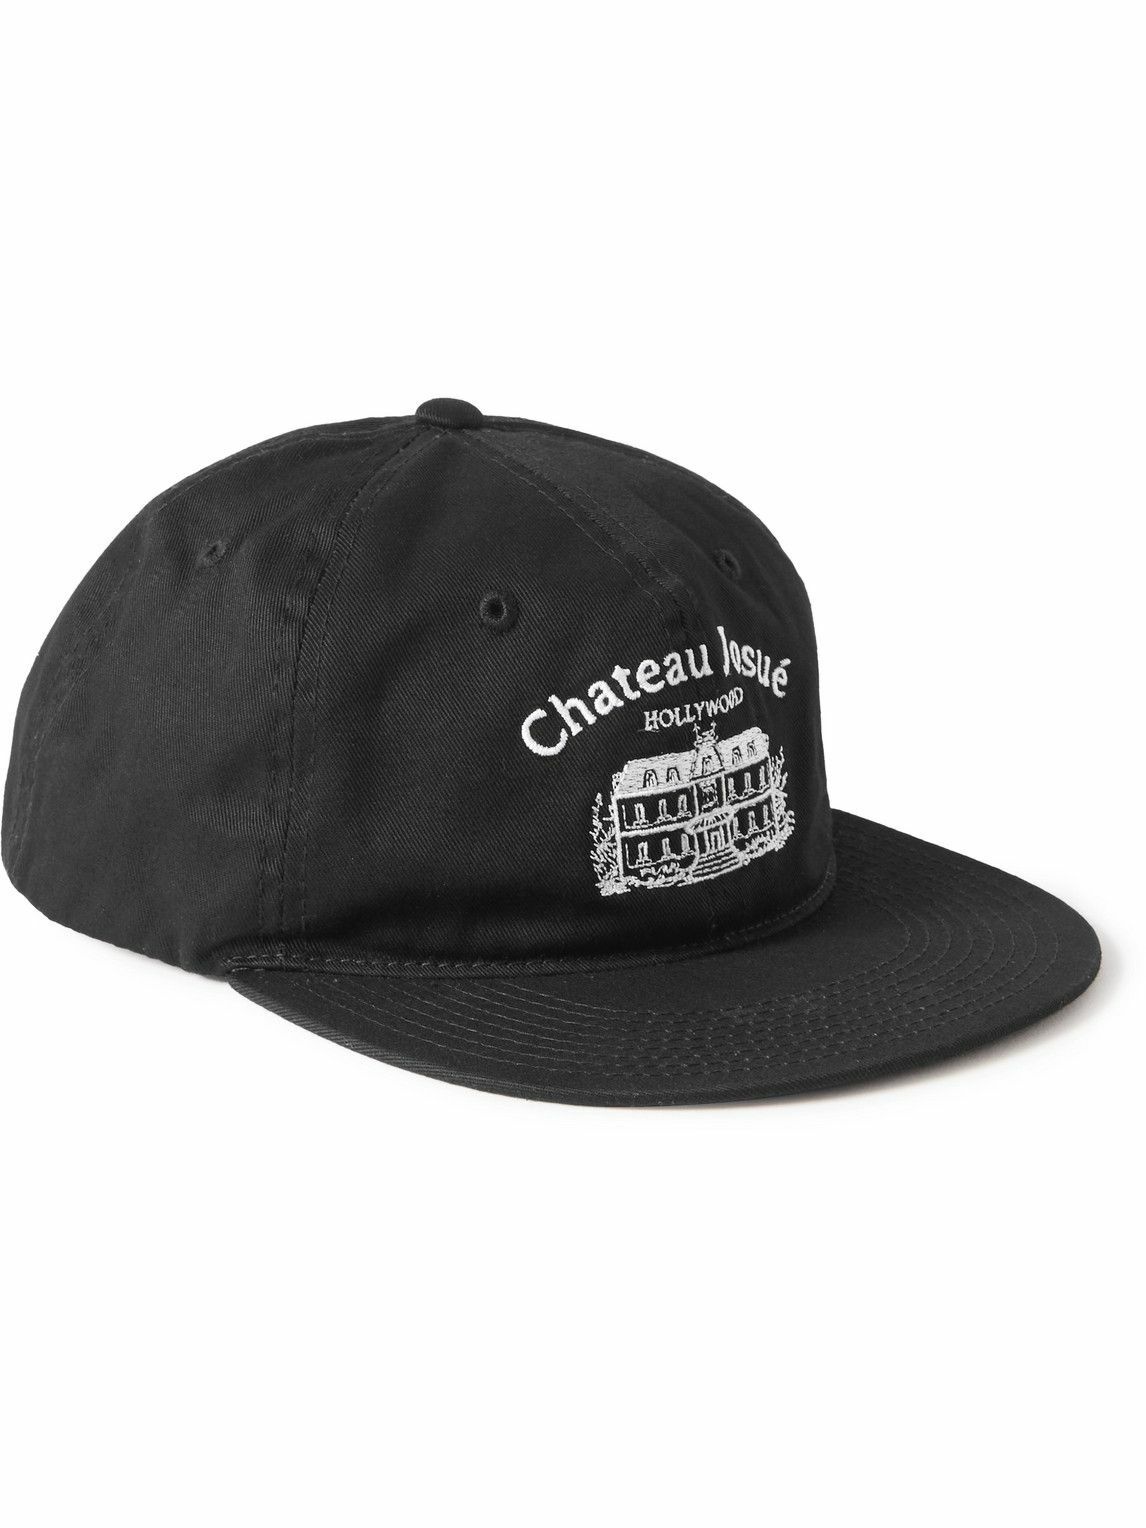 Photo: Gallery Dept. - Chateau Josué Embroidered Cotton-Twill Baseball Cap